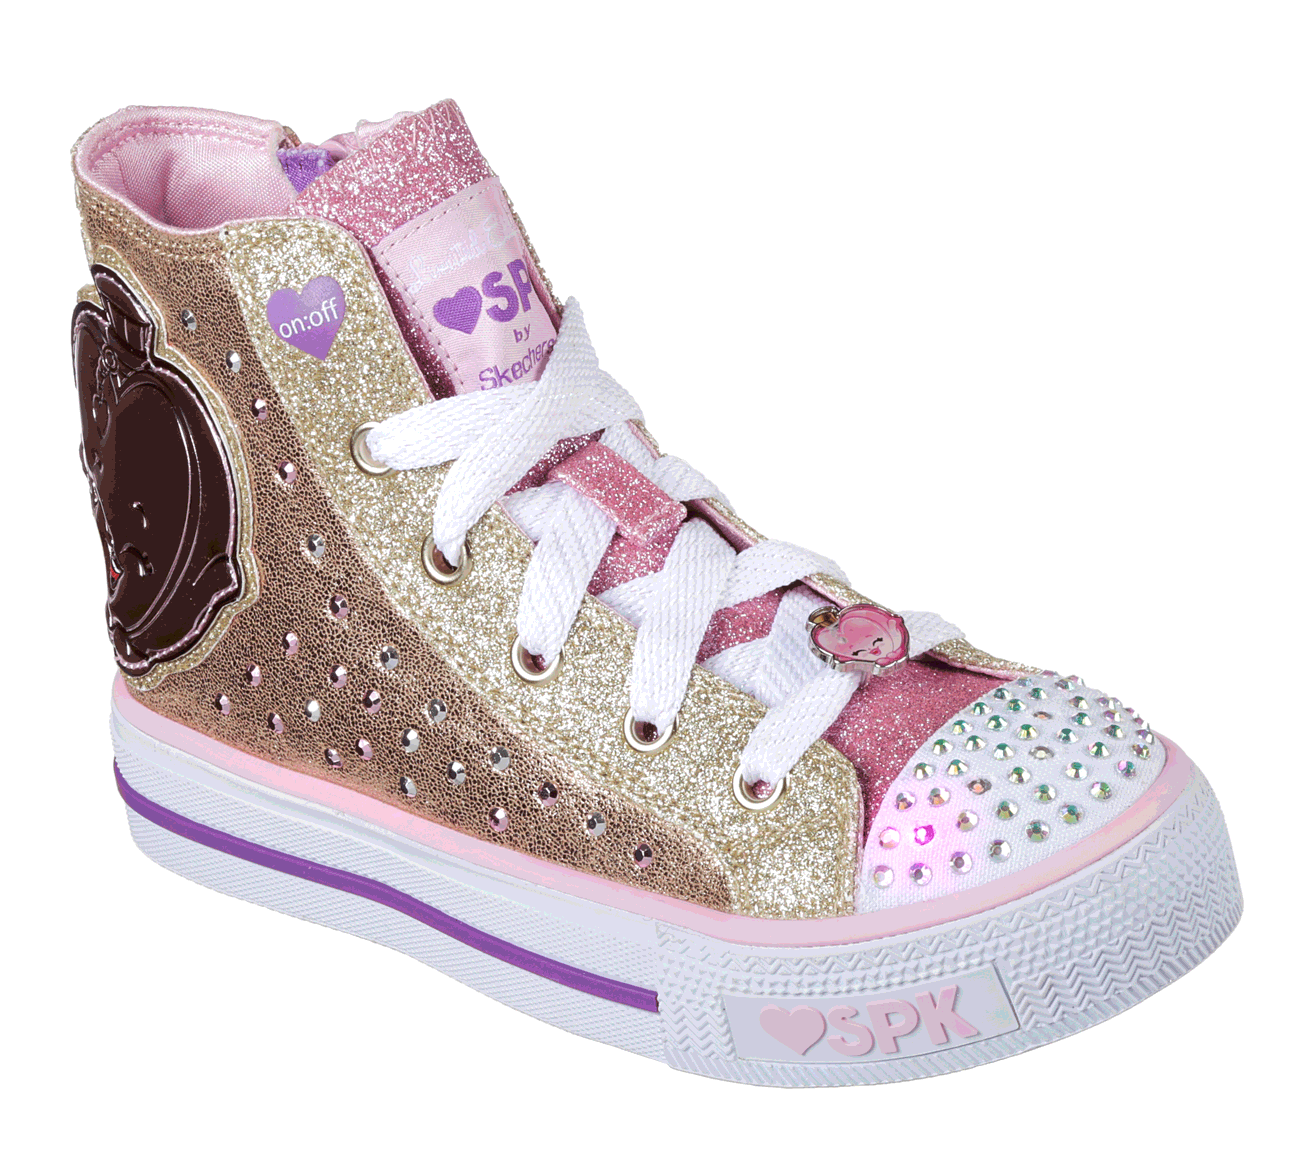 Buy SKECHERS Shopkins: Shuffles - Sally Scent Exclusives Shoes